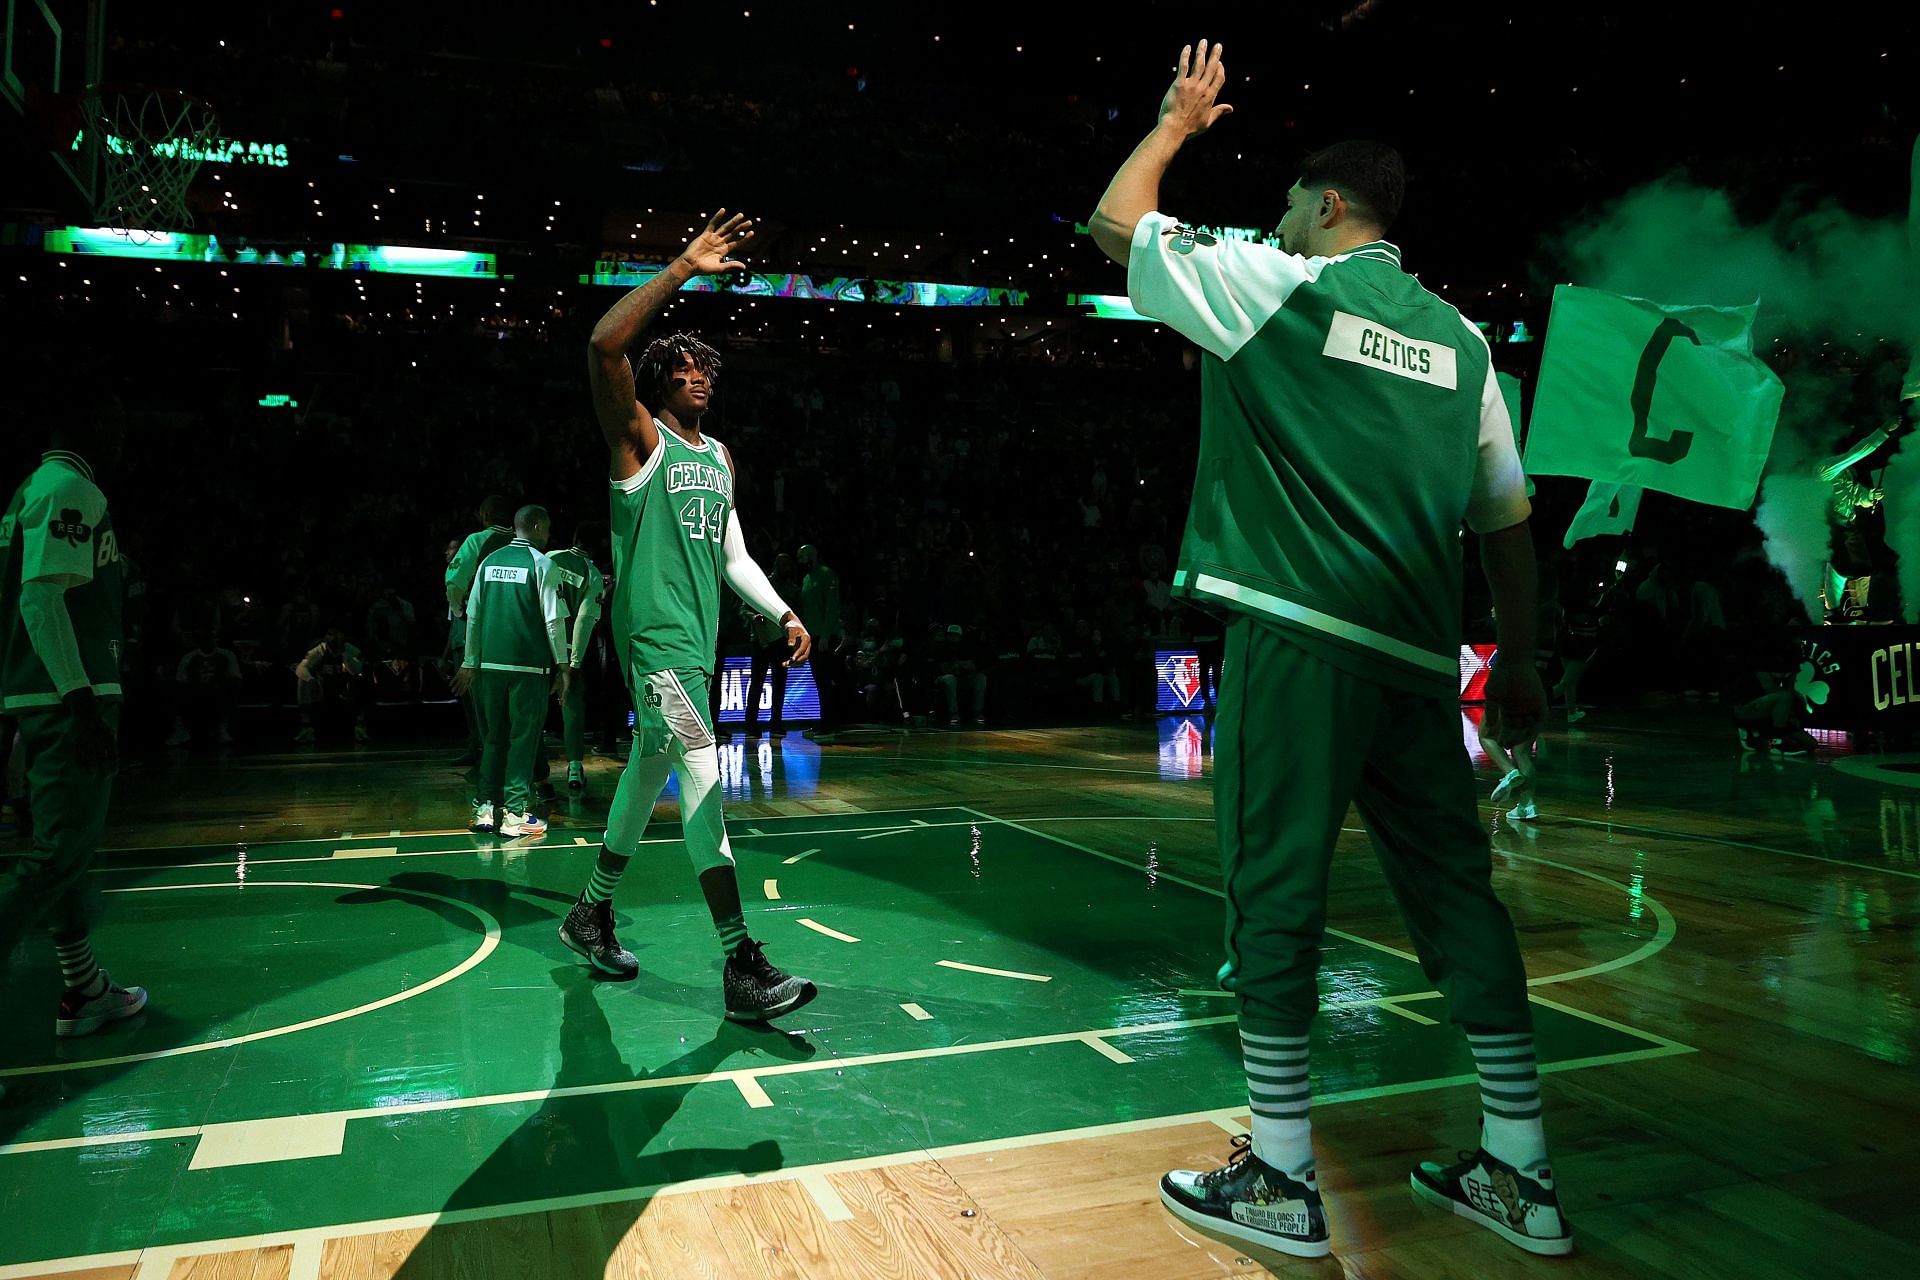 Robert Williams (left) is introduced at the Boston Celtics game